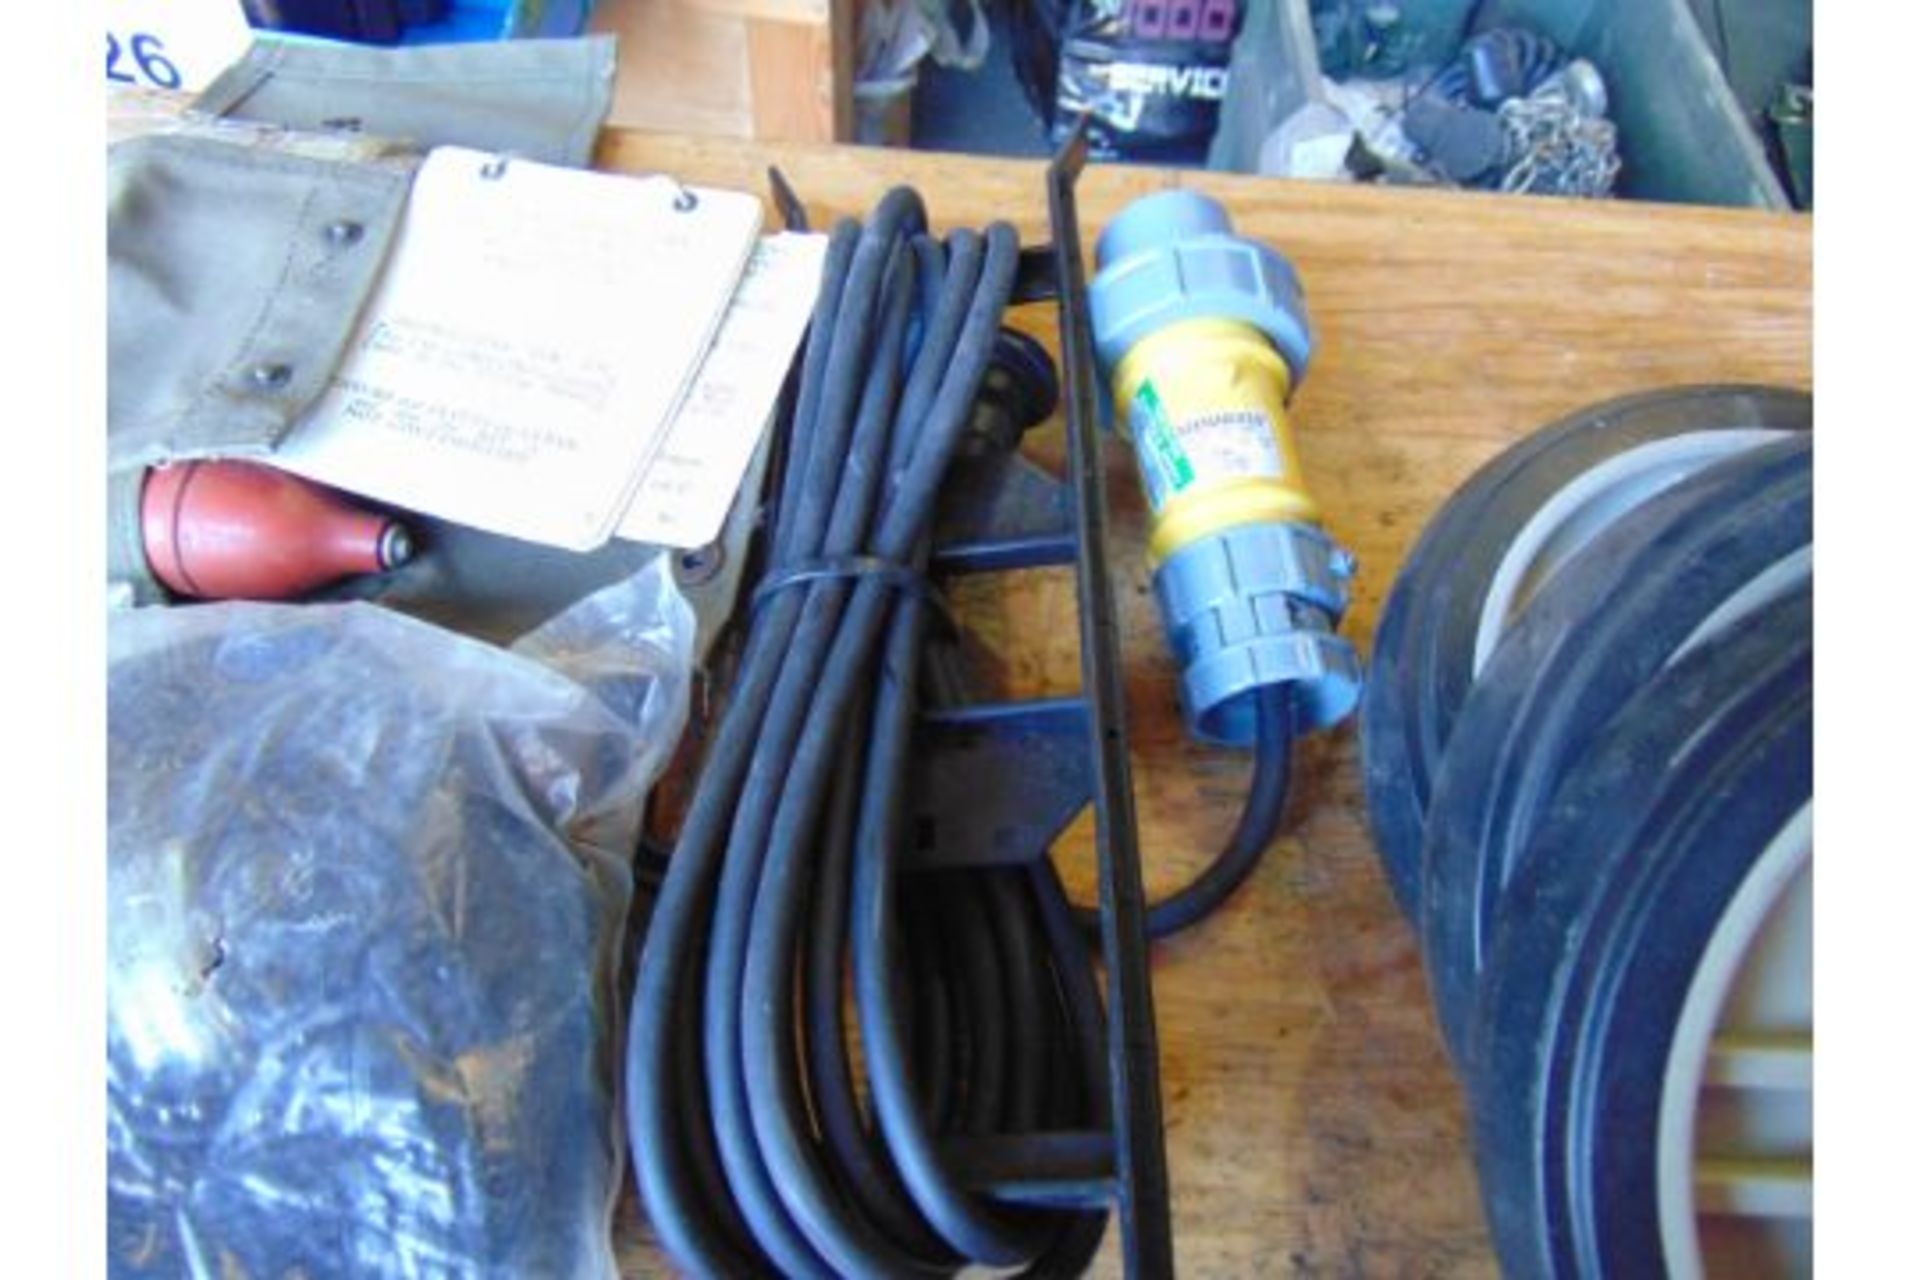 Wheels, Ext Lead, Straps, Chemical Agent Test Kit